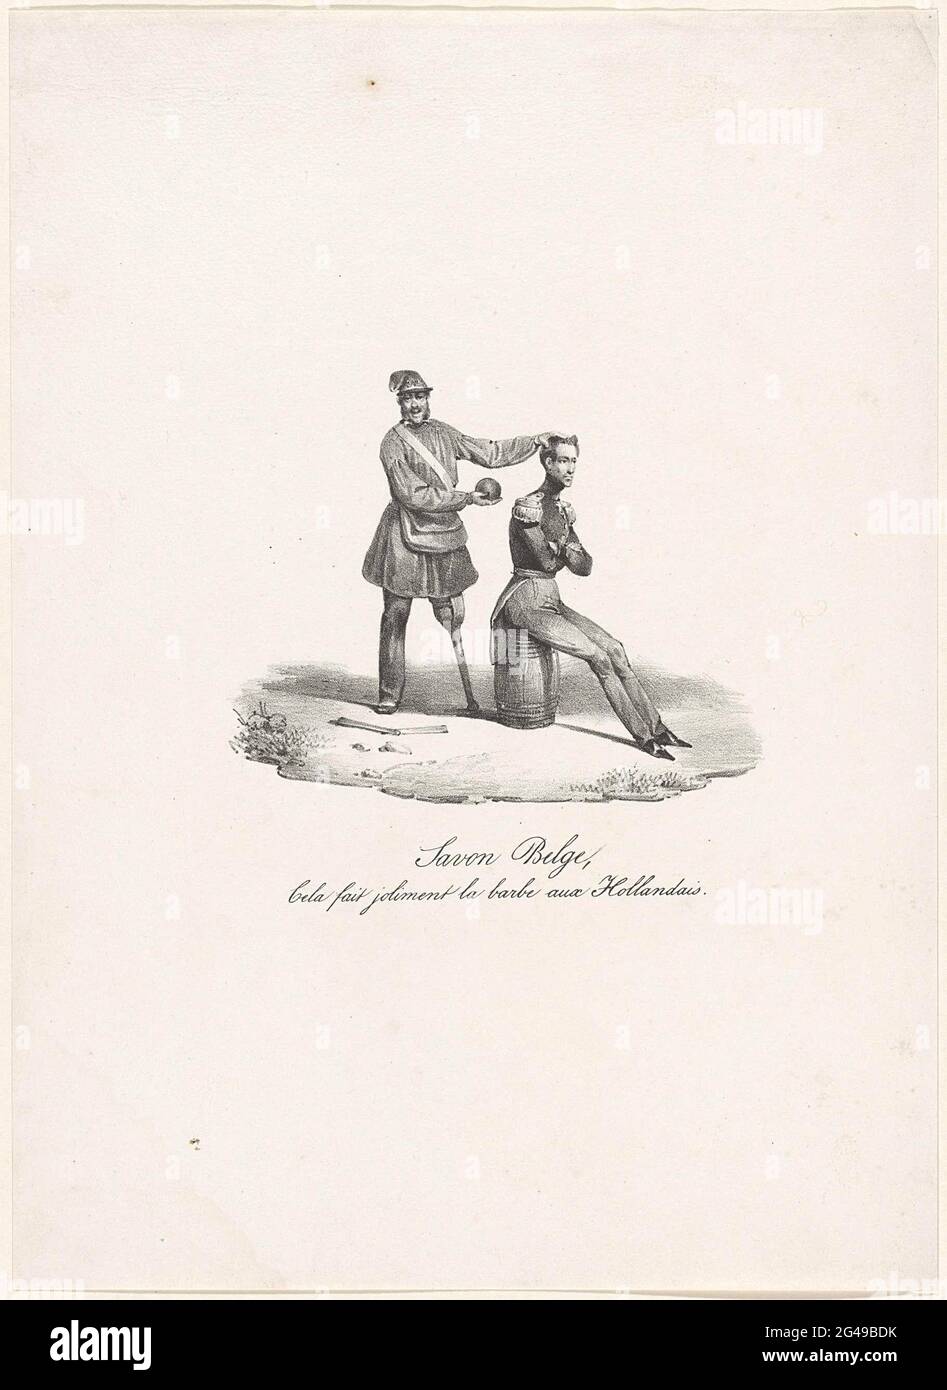 Belgian soap, 1830; Savon Belge, Cela Fait Joliment La Barbe Aux Hollandais. Cartoon on Prince Frederik shaved by the Barbier Jambe de Bois, 1830. The prince is sitting on a ton, behind him the cheerful Belgian insurgent as a barber with a gun bullet as a soap. Stock Photo